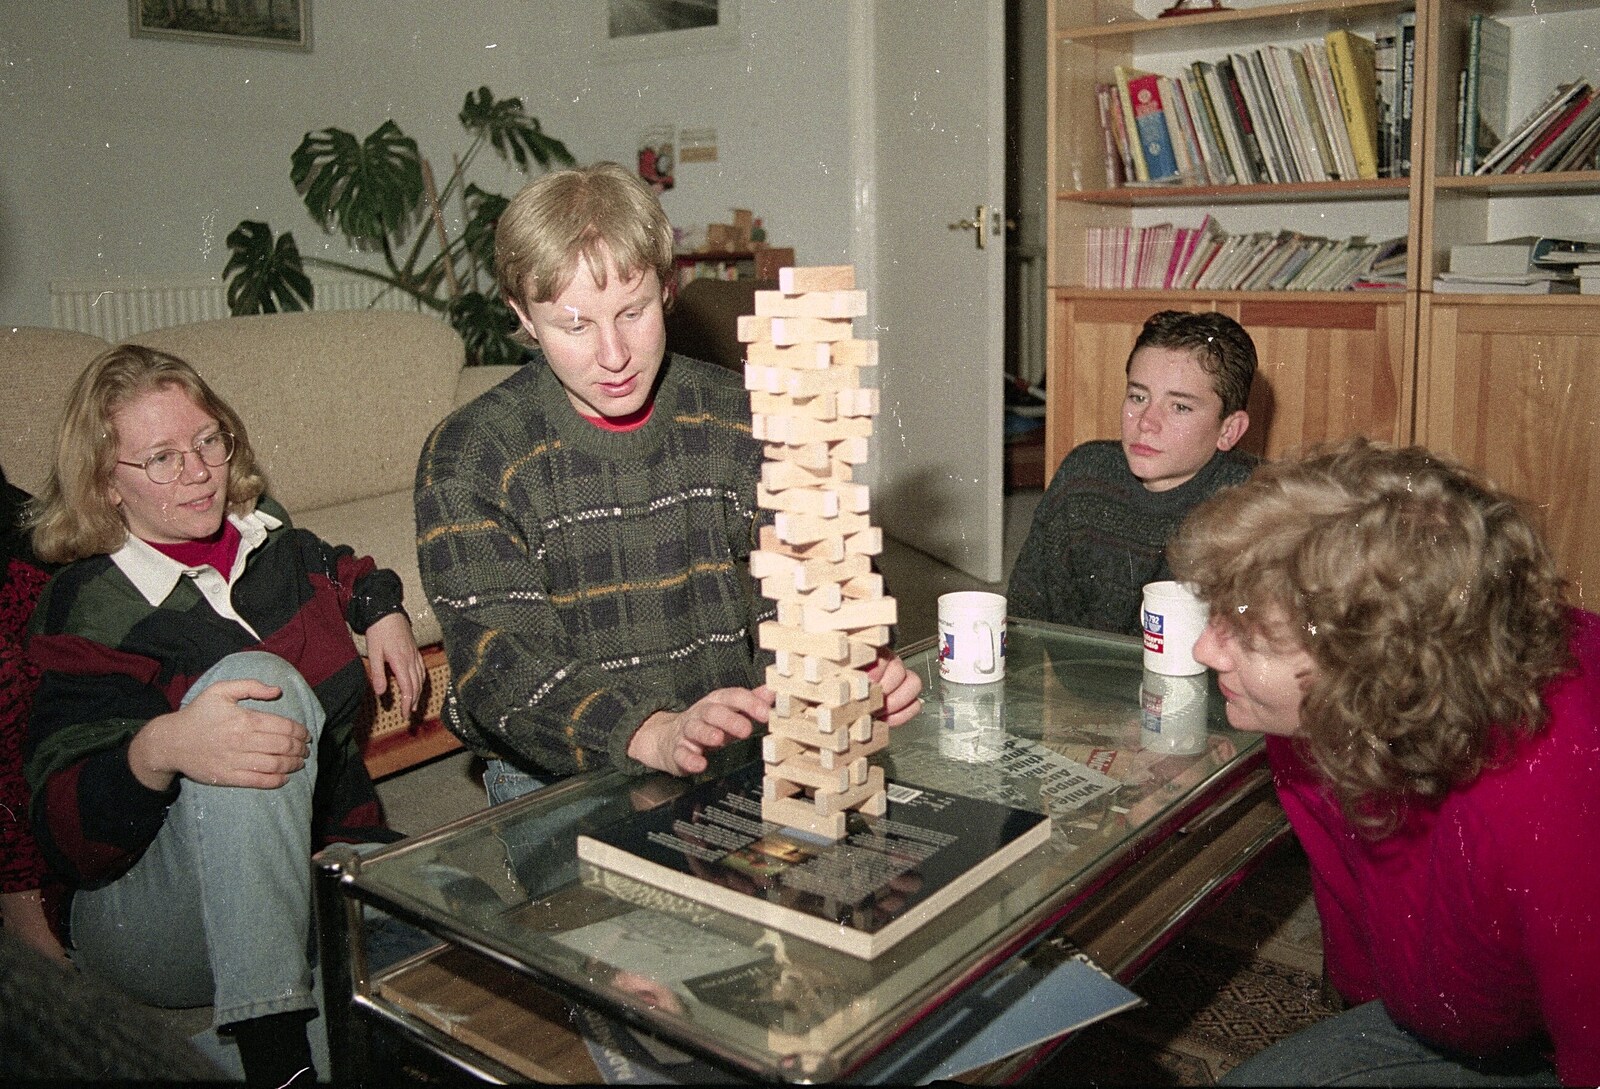 An instense game of Jenga occurs from Darts at the Swan Inn and a Nigel Party, Lancaster Gate - 23rd March 1991